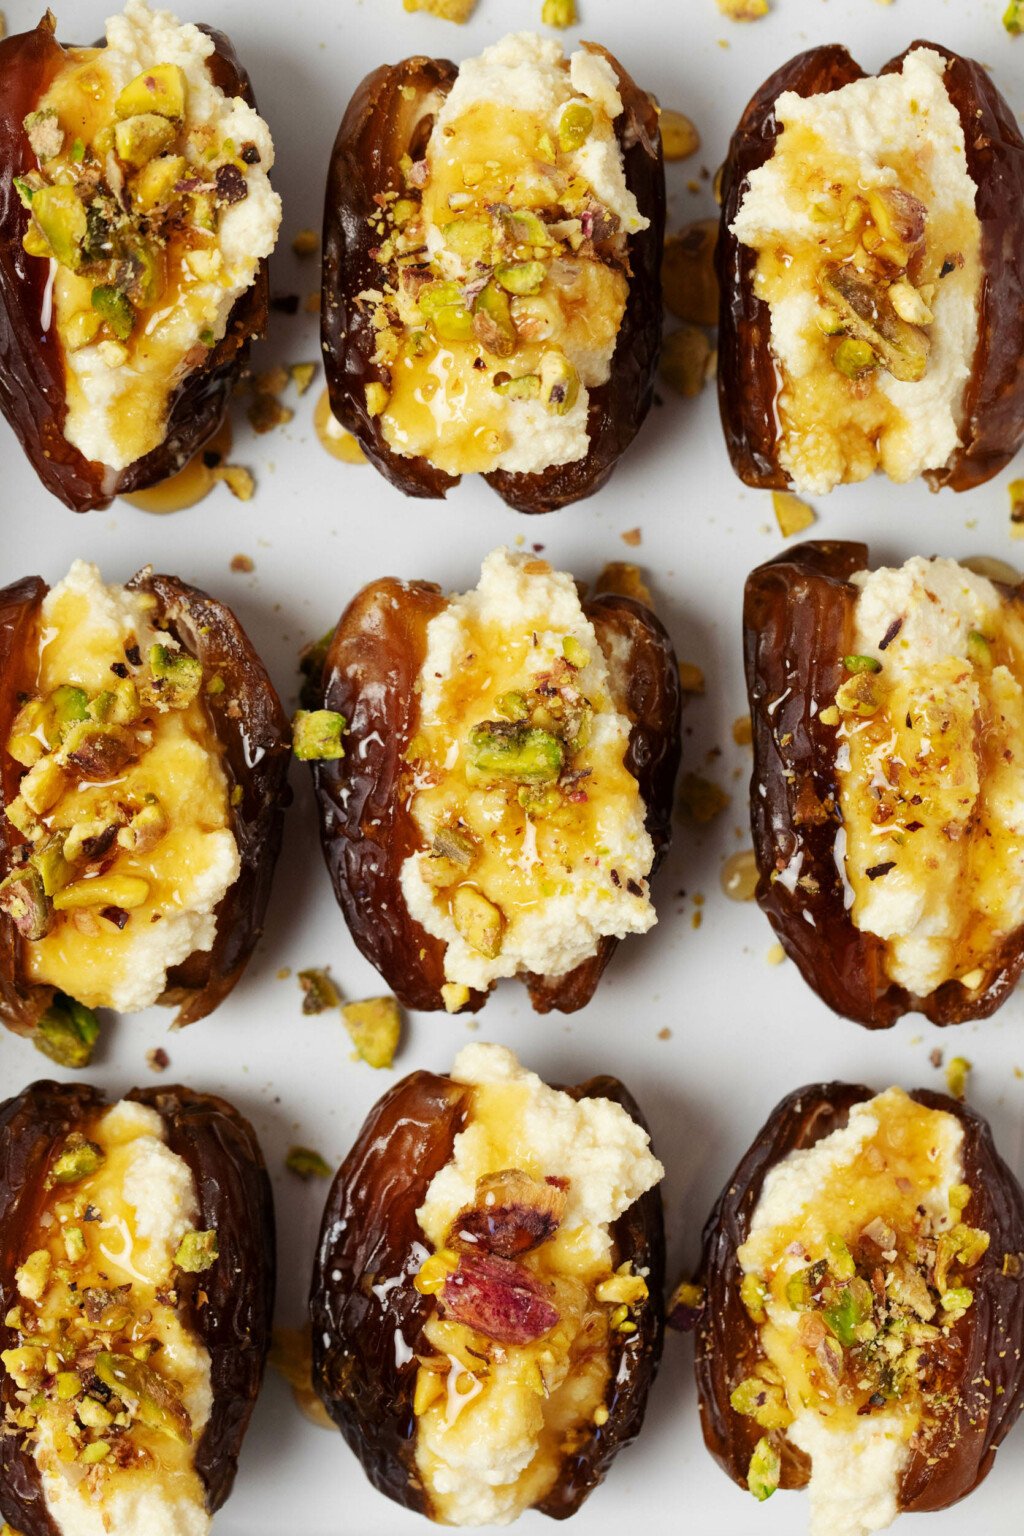 A close-up, overhead image of stuffed dates, which have been made with vegan cashew cheese. The dates are topped with chopped pistachio nuts and drizzled with herb infused syrup.